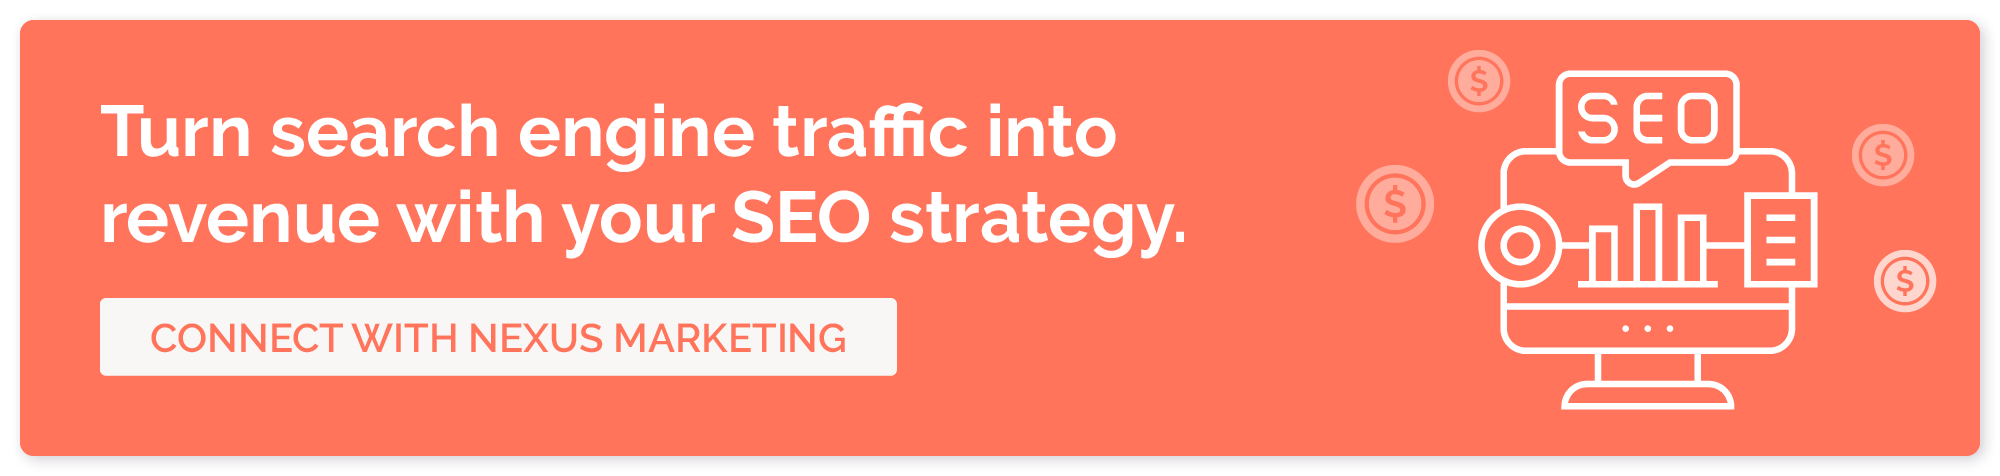 Turn search engine traffic into revenue with your SEO strategy. Connect with Nexus Marketing.